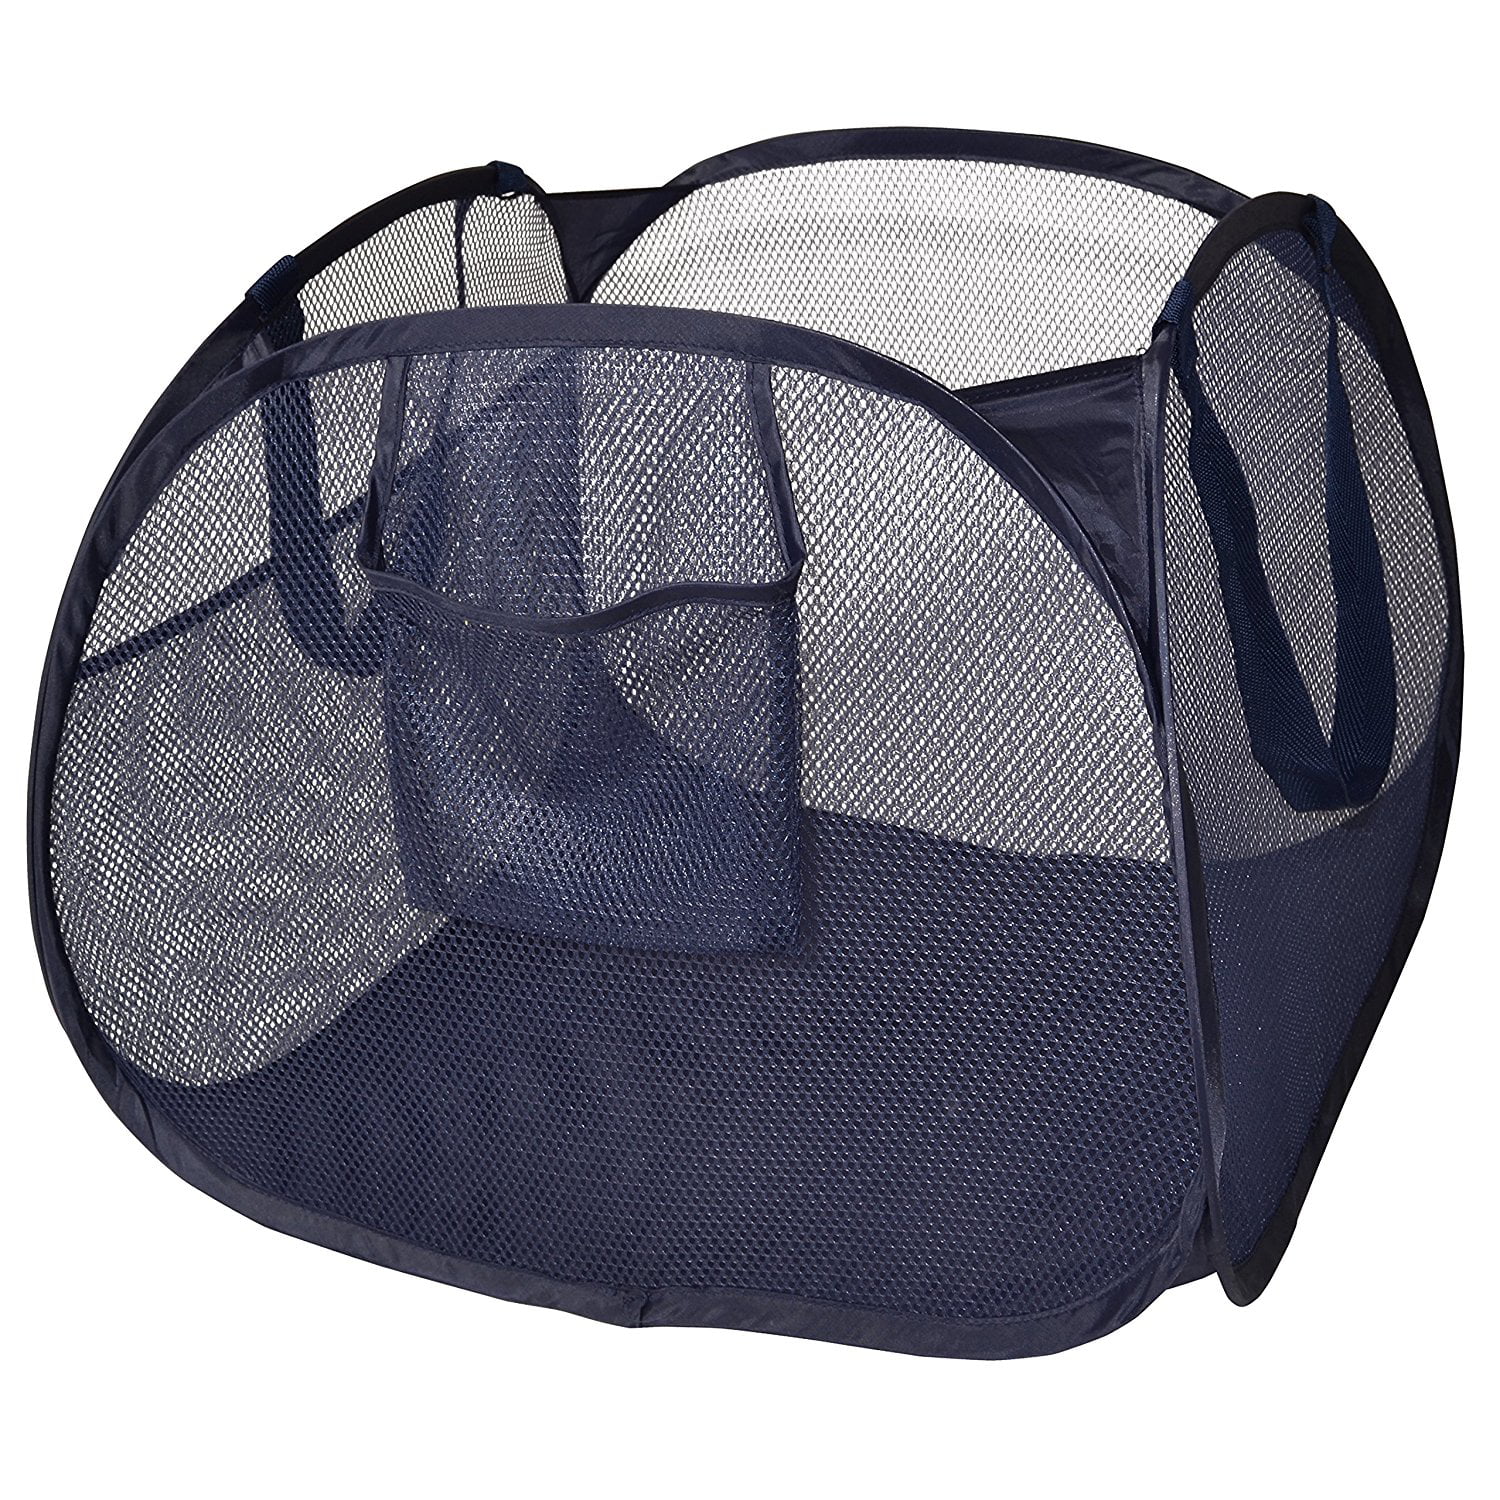 PROMART DAZZ Deluxe Large Mesh Spiral Laundry Pop Up Hamper with Handles Blue 